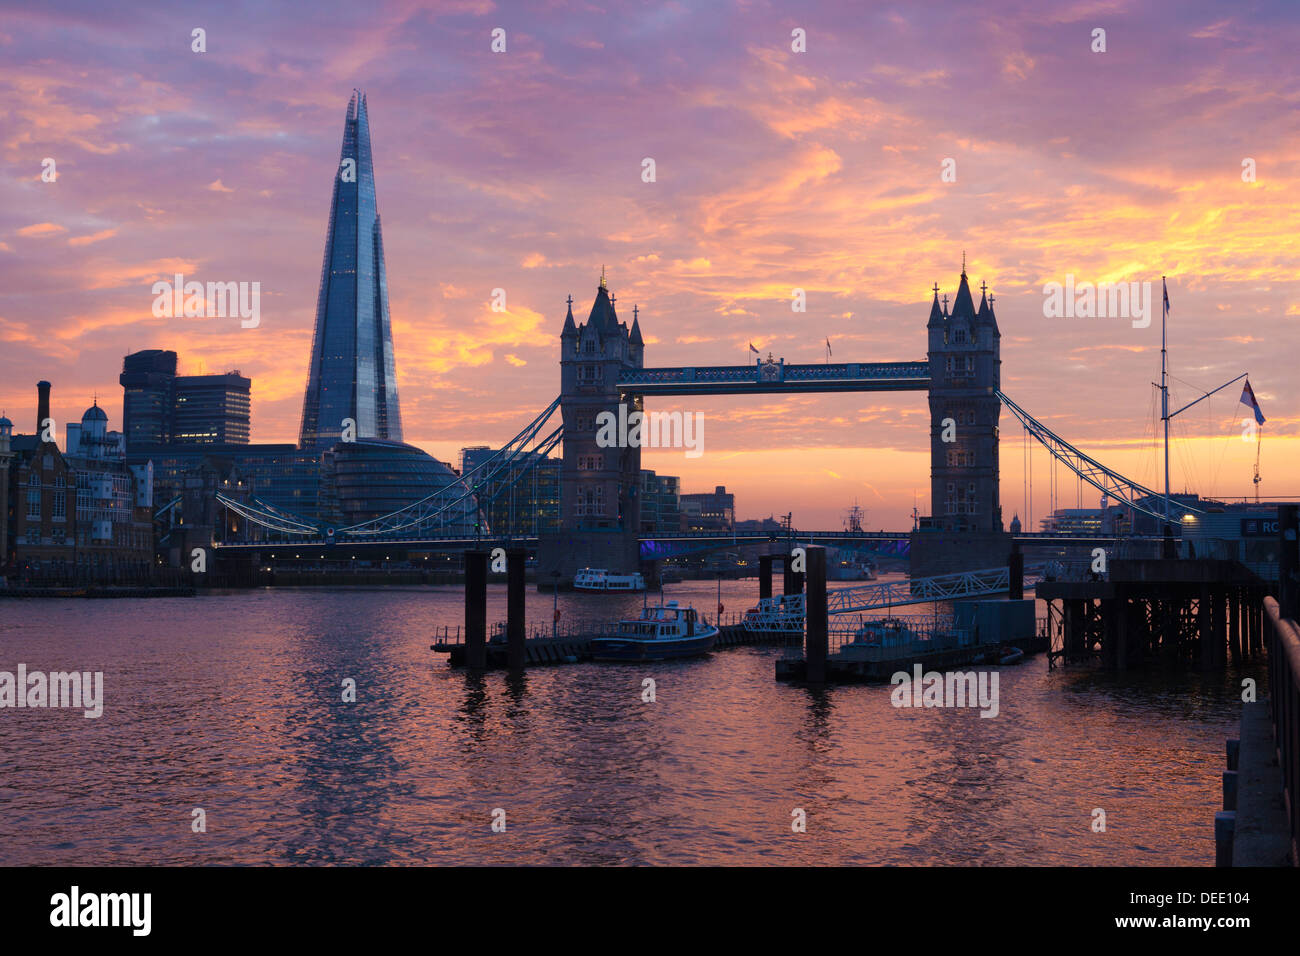 The Shard and Tower Bridge on the River Thames at sunset, London, England, United Kingdom, Europe Stock Photo